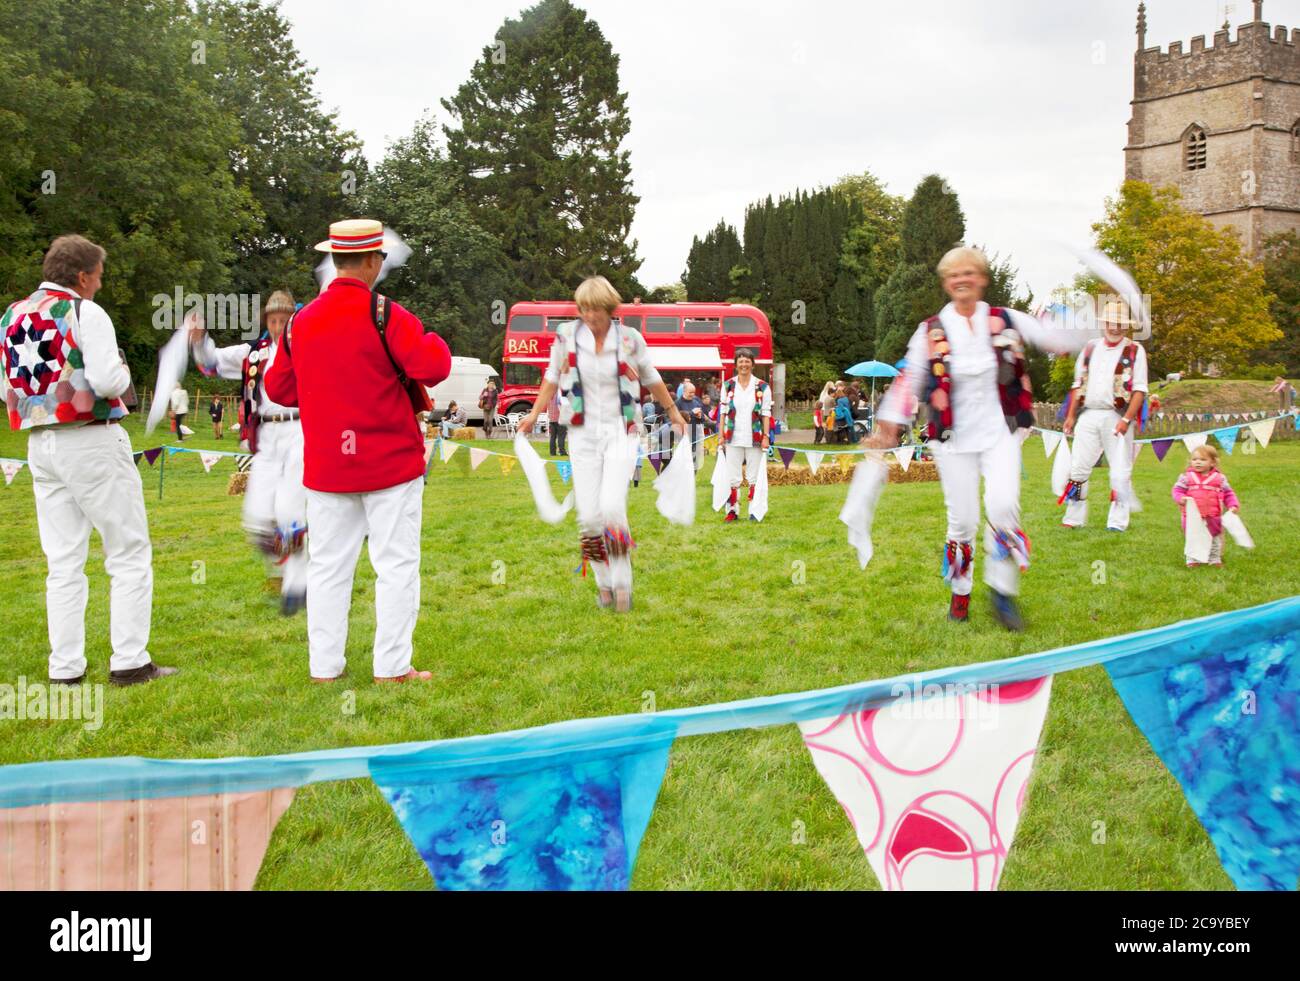 Morris dancers at an country village fete on a playing field Stock Photo